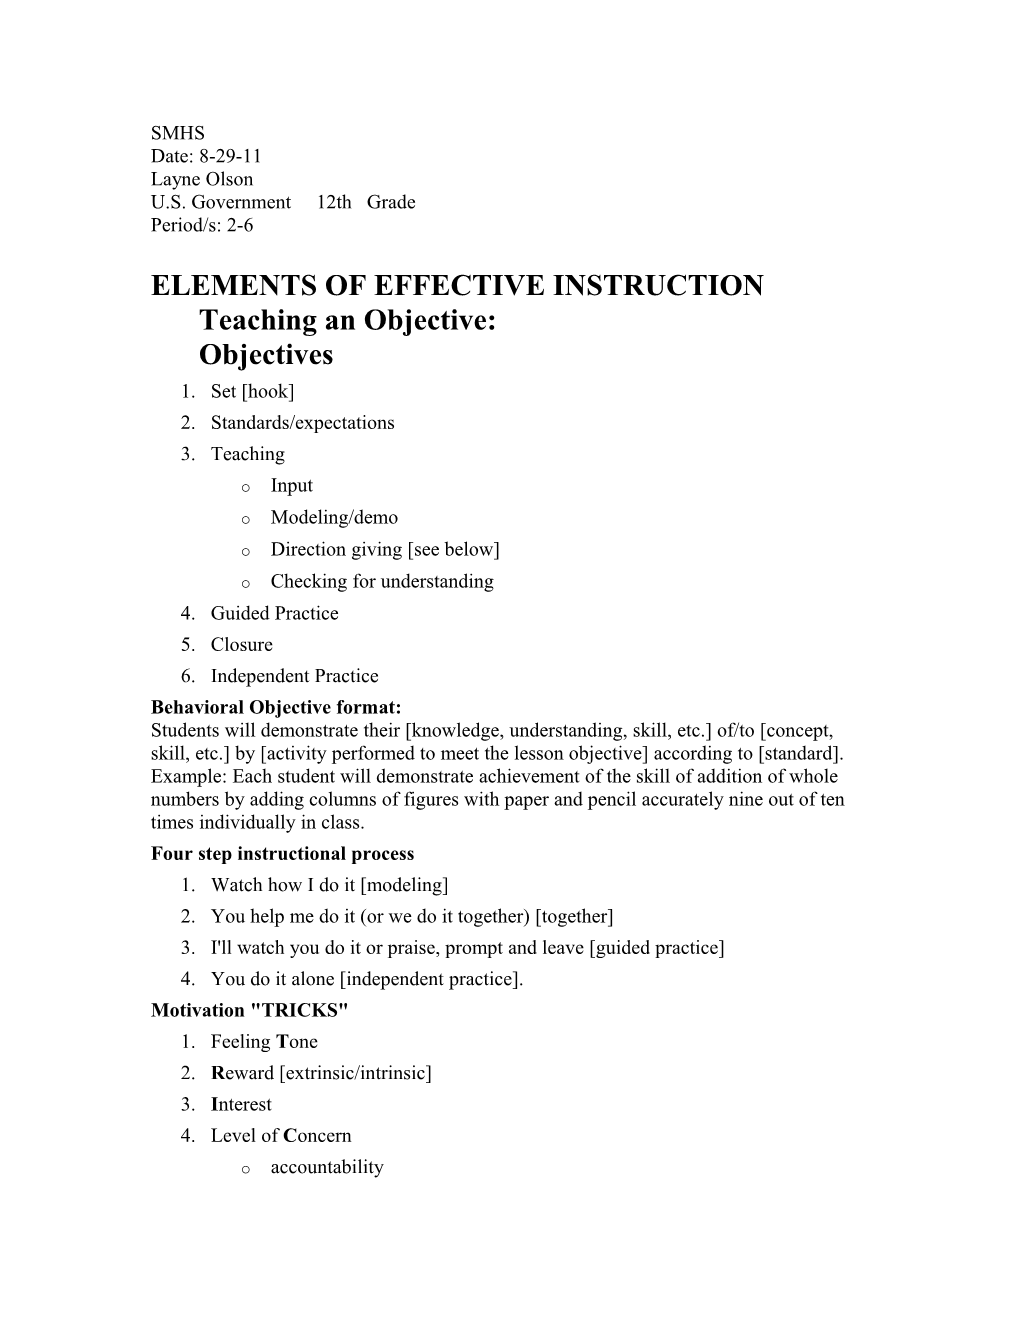 ELEMENTS of EFFECTIVE Instructionteaching an Objective: Objectives